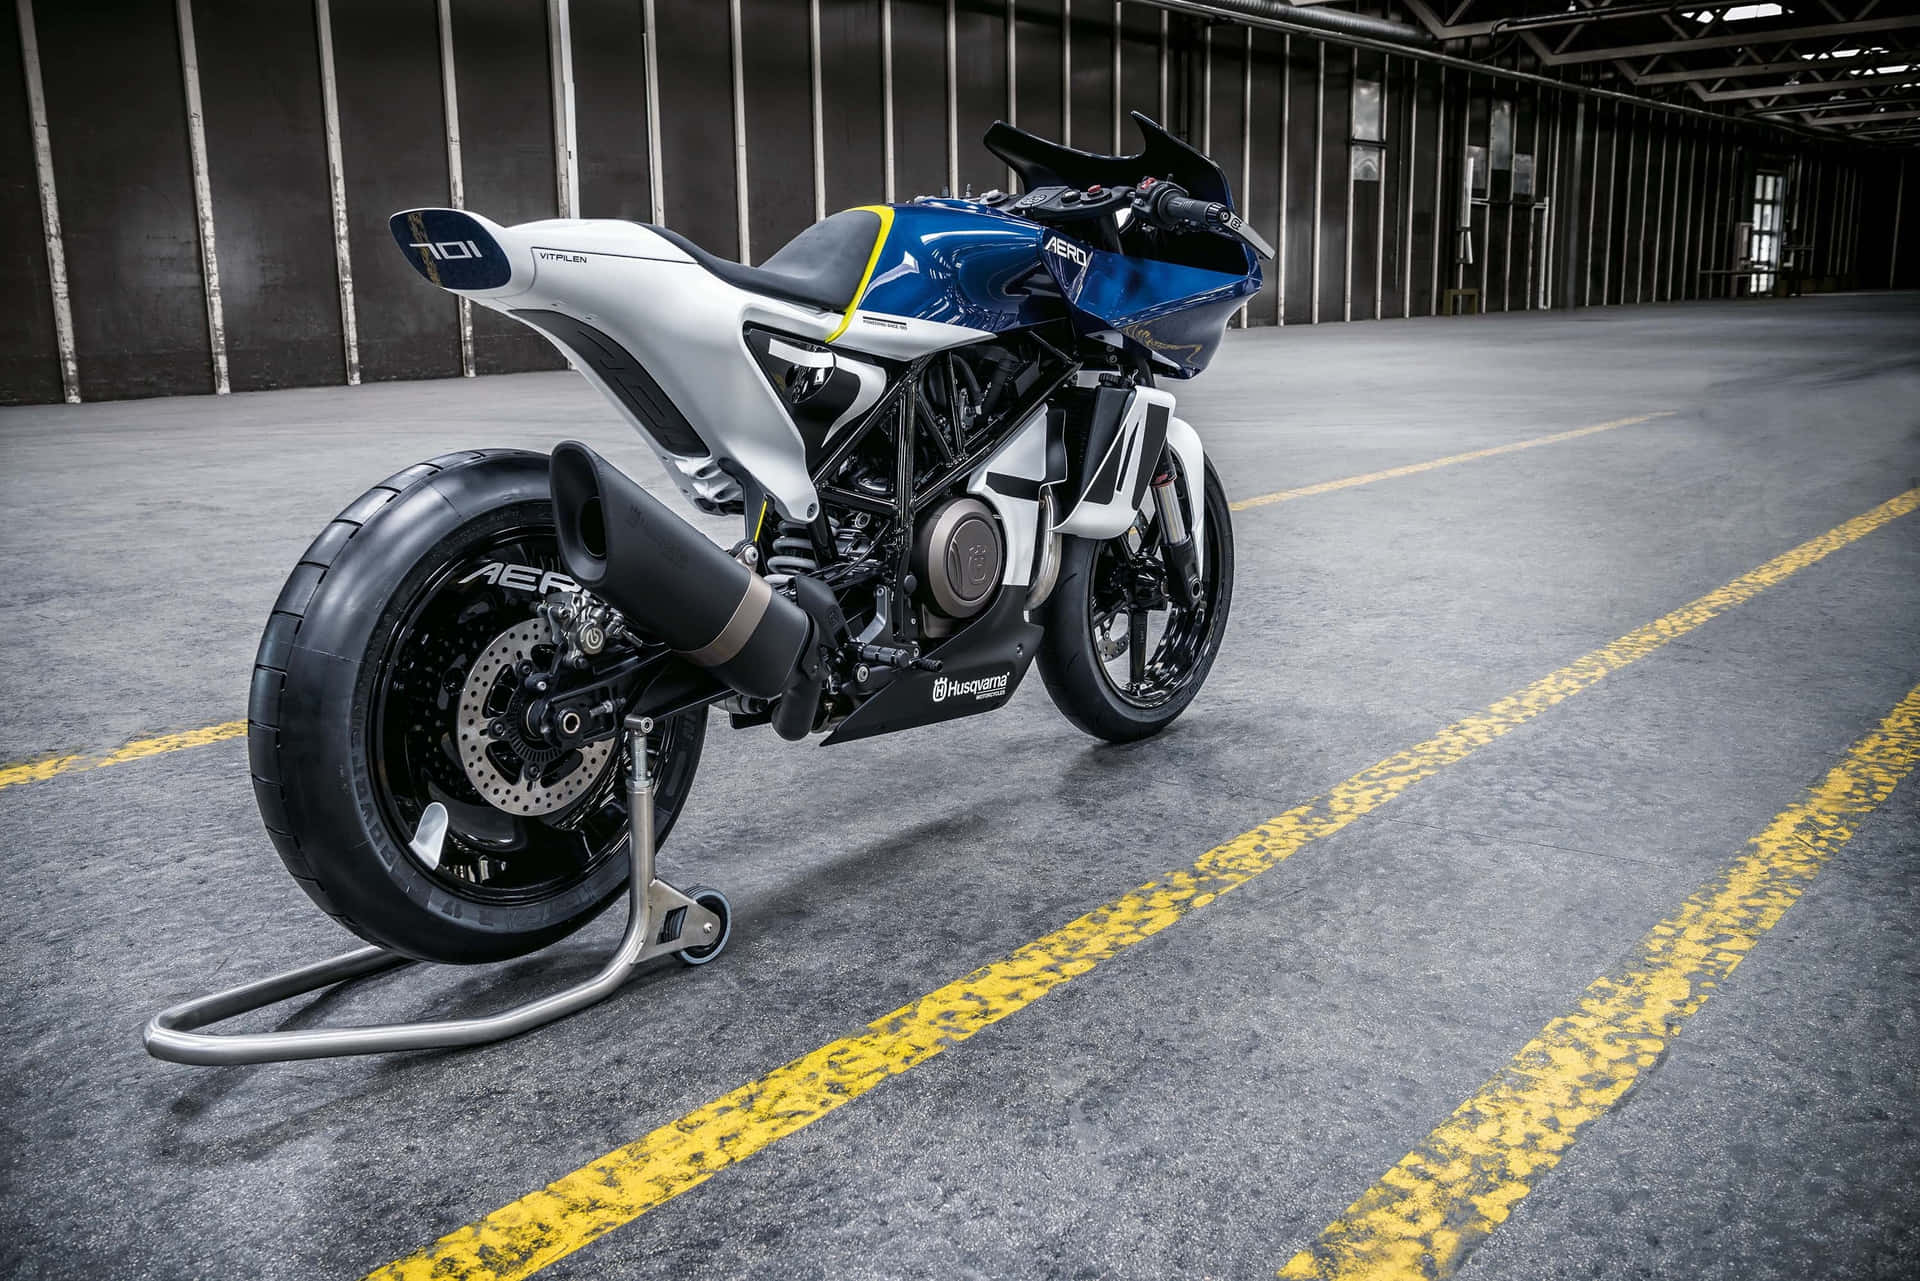 Caption: Husqvarna Motorcycle Powered For Speed Wallpaper